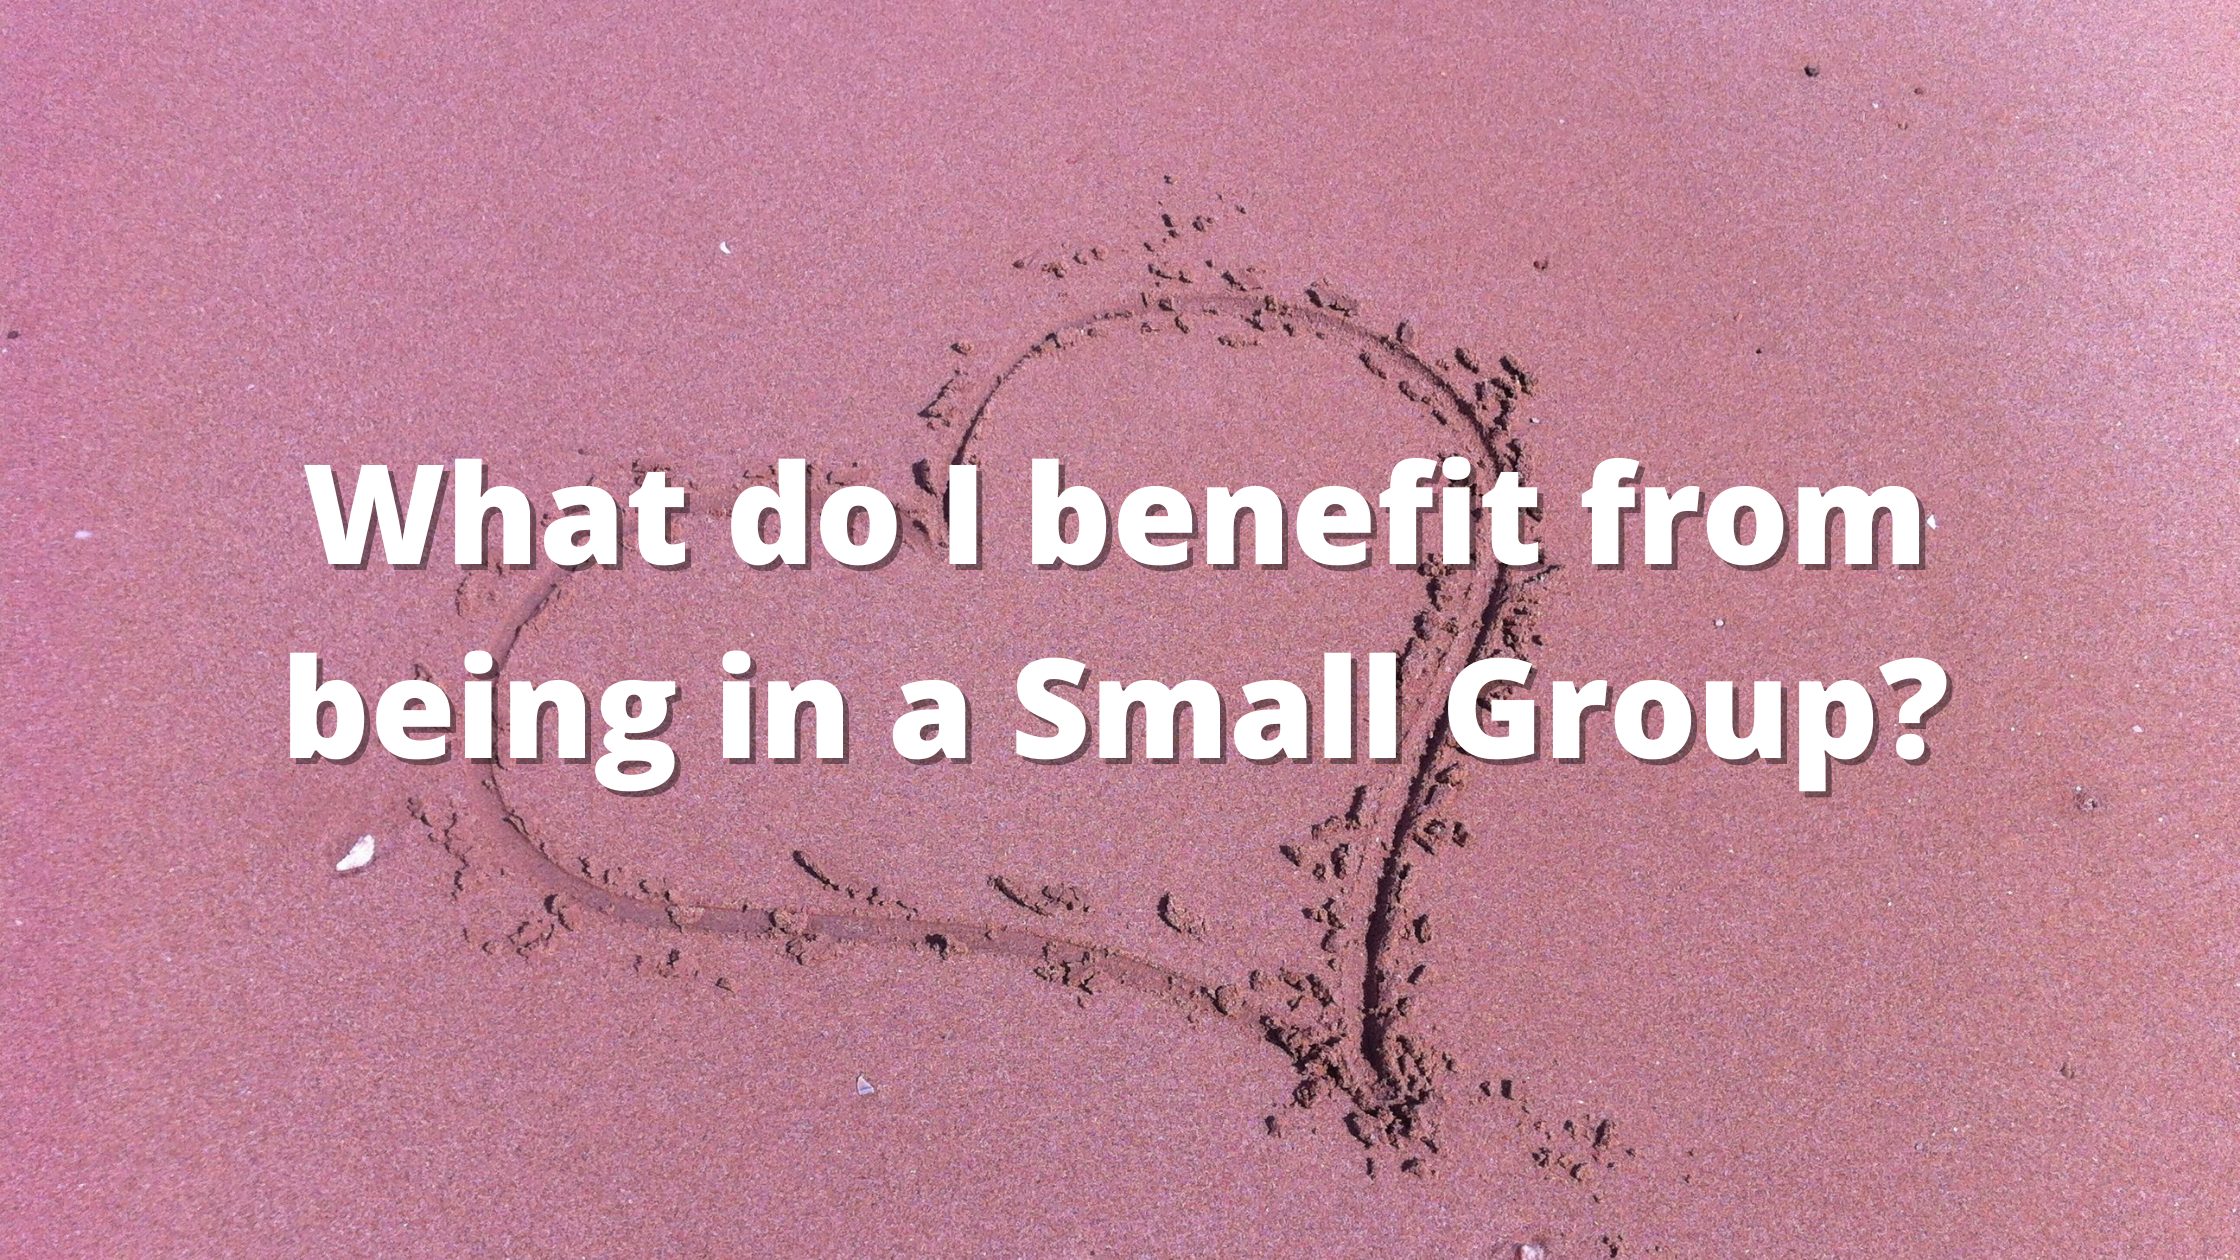 What do I benefit from being in a Small Group?